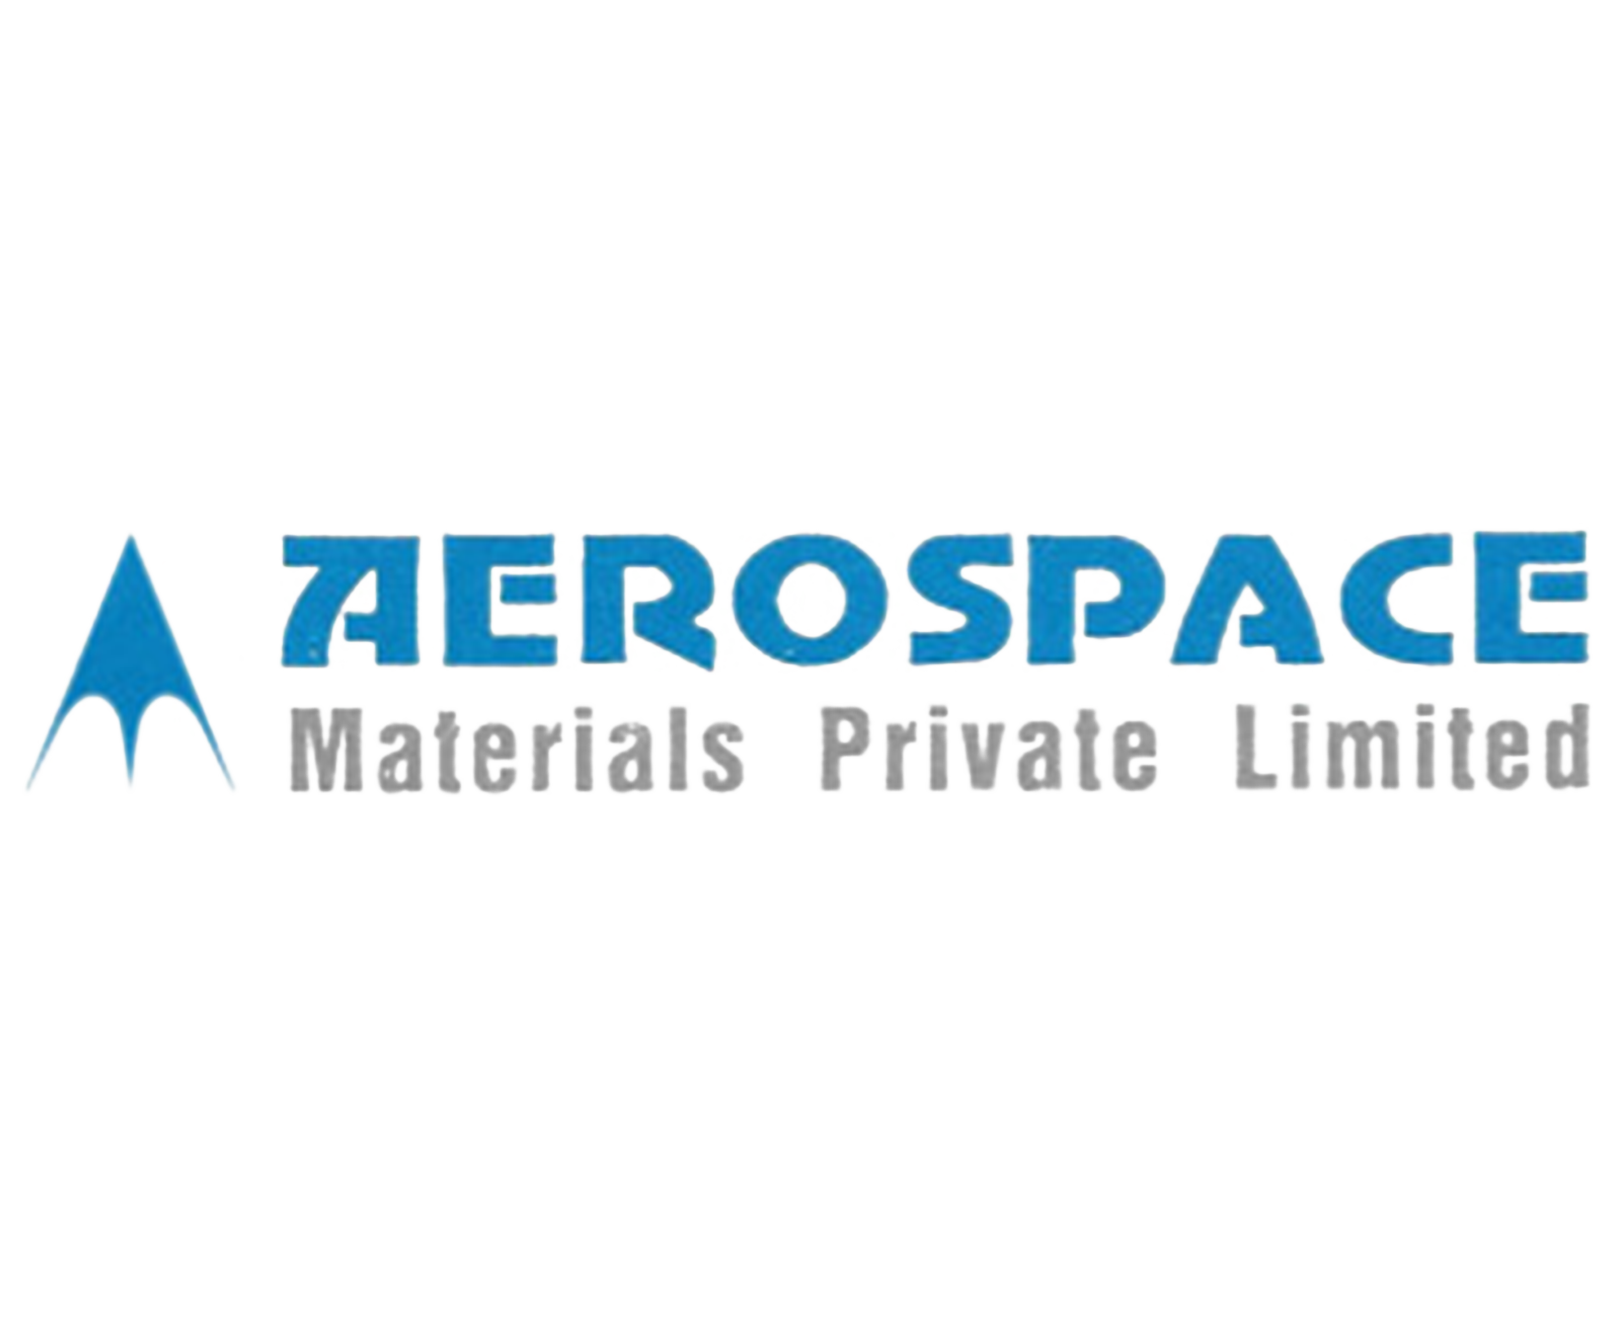 Aerospace materials private limited